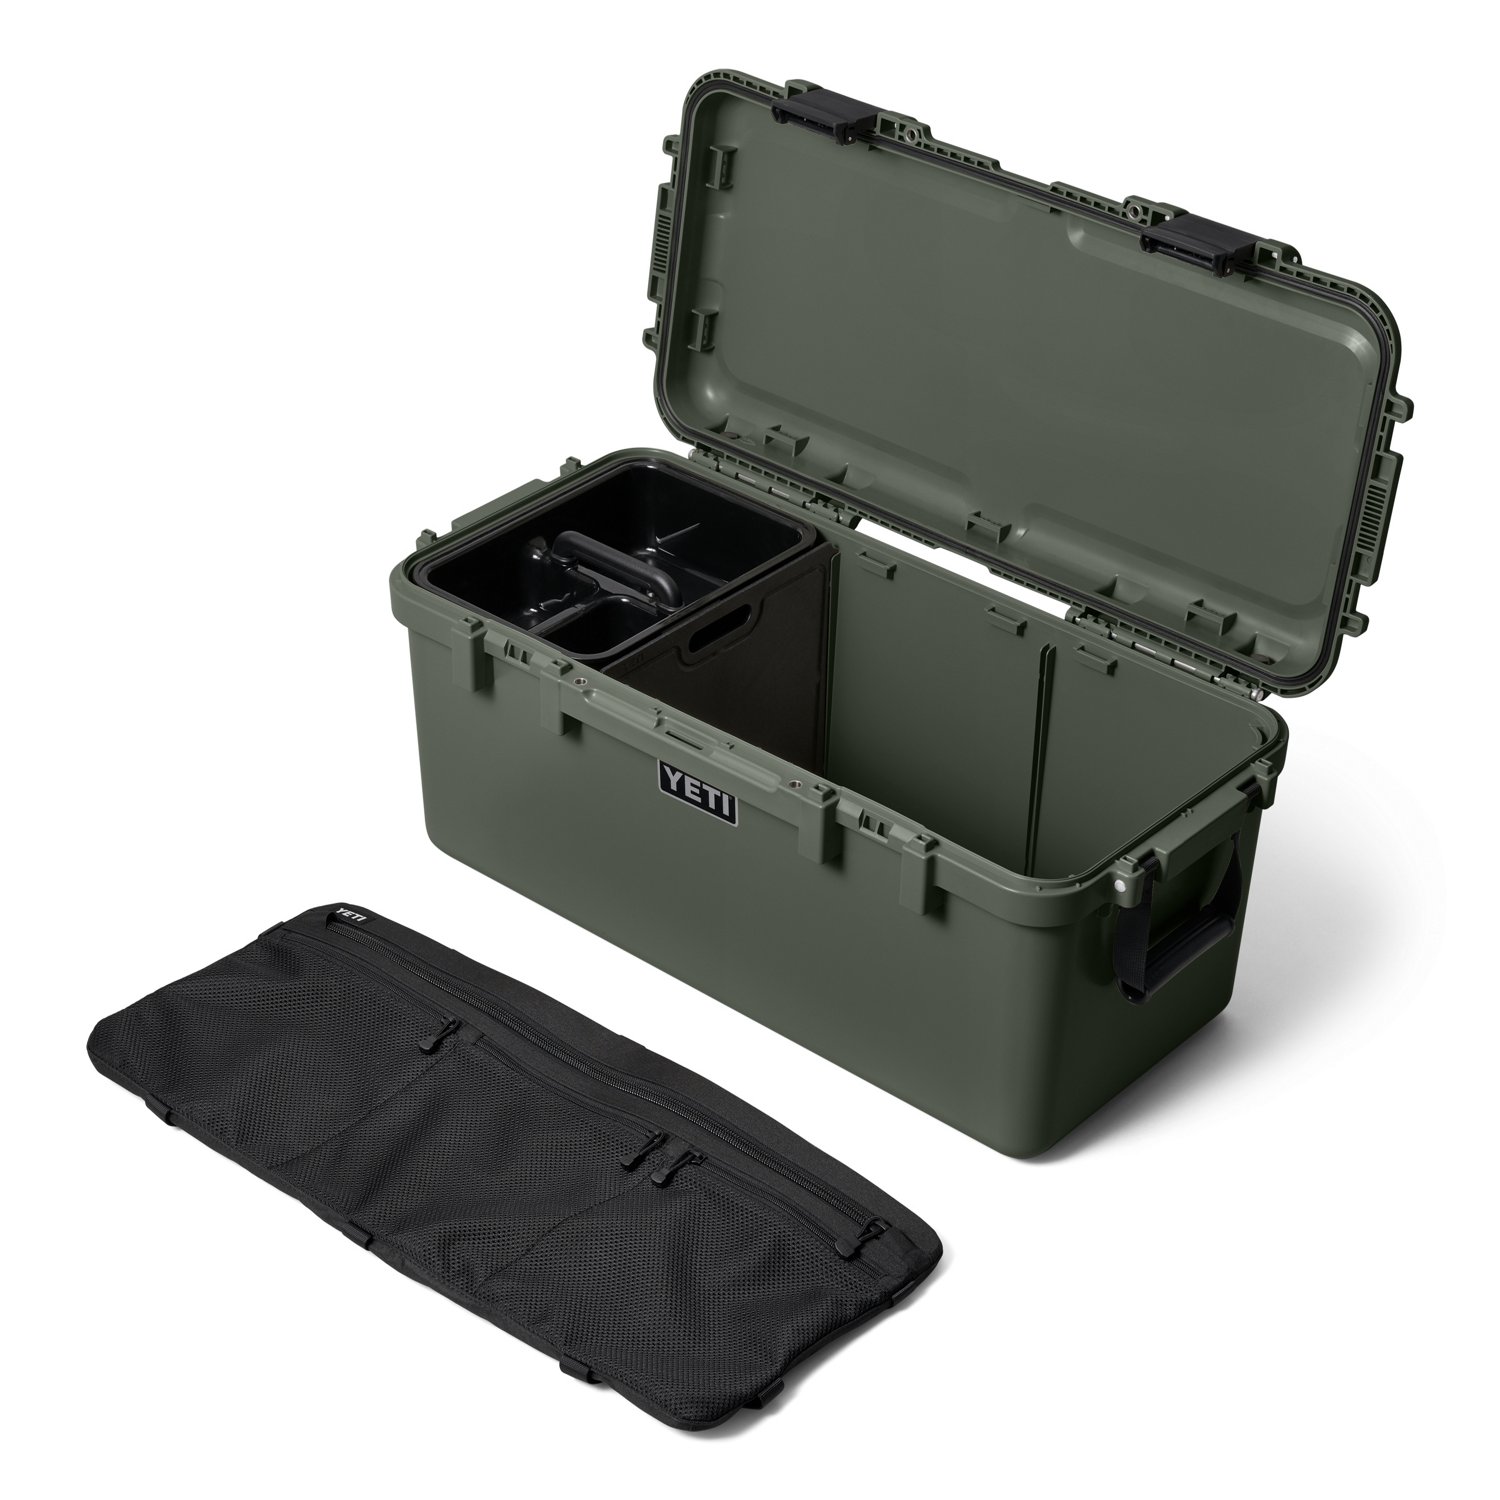 https://academy.scene7.com/is/image/academy//hunting-accessories/yeti-loadout-gobox-60-gear-case-18060131253-green/52696c97c33d4a459057b6d4636585d7